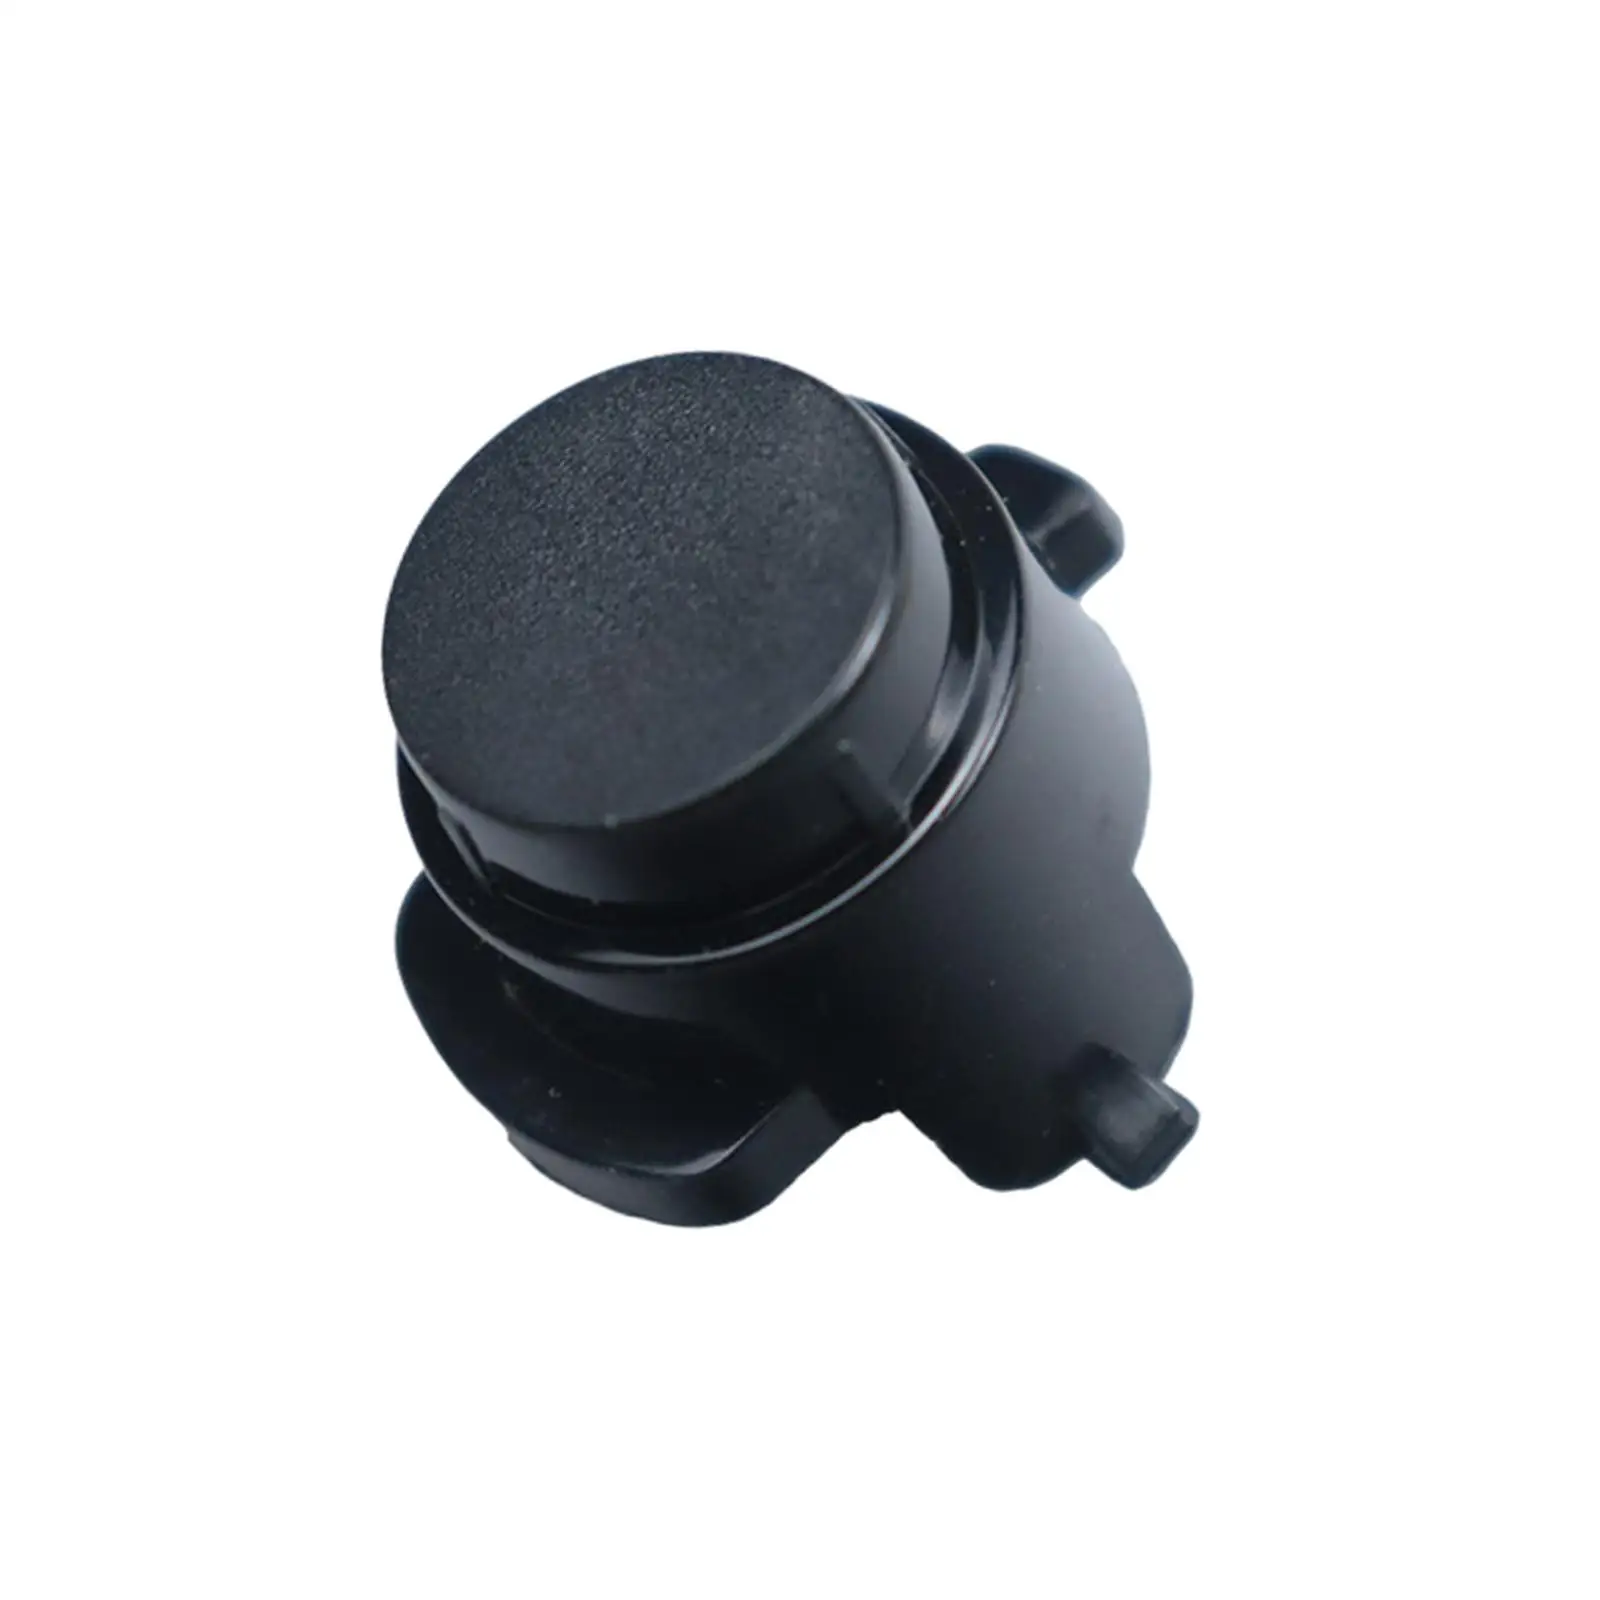 Parking Aid Cap ,Auto Accessory Replaces ,Parking Assist Alarm Cover for W166 W221 Professional, Easy Installation Quality